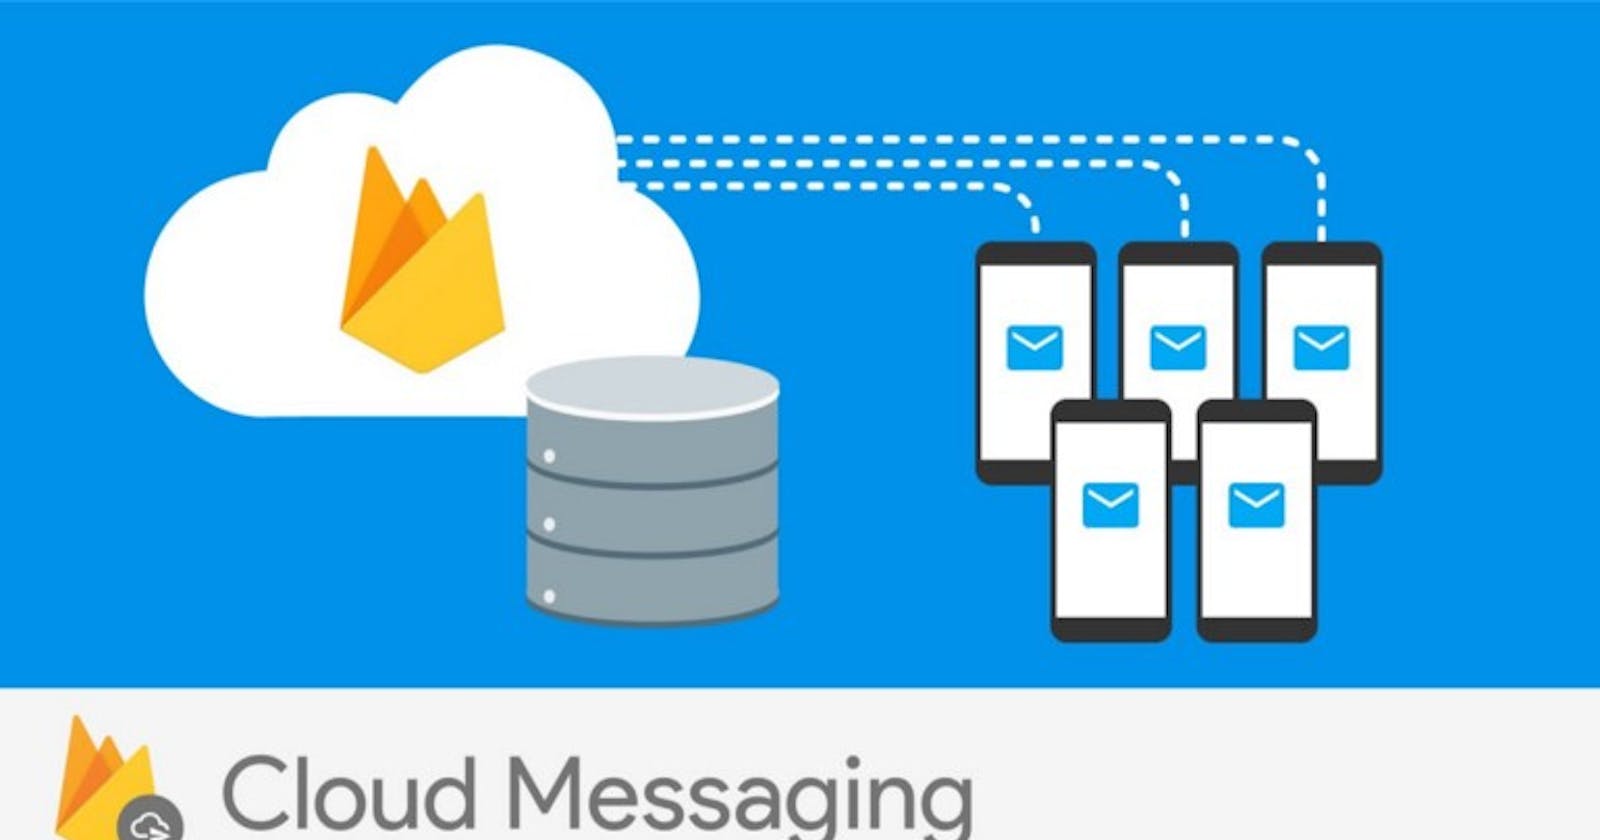 How to Add Cloud Messaging to Your Android App